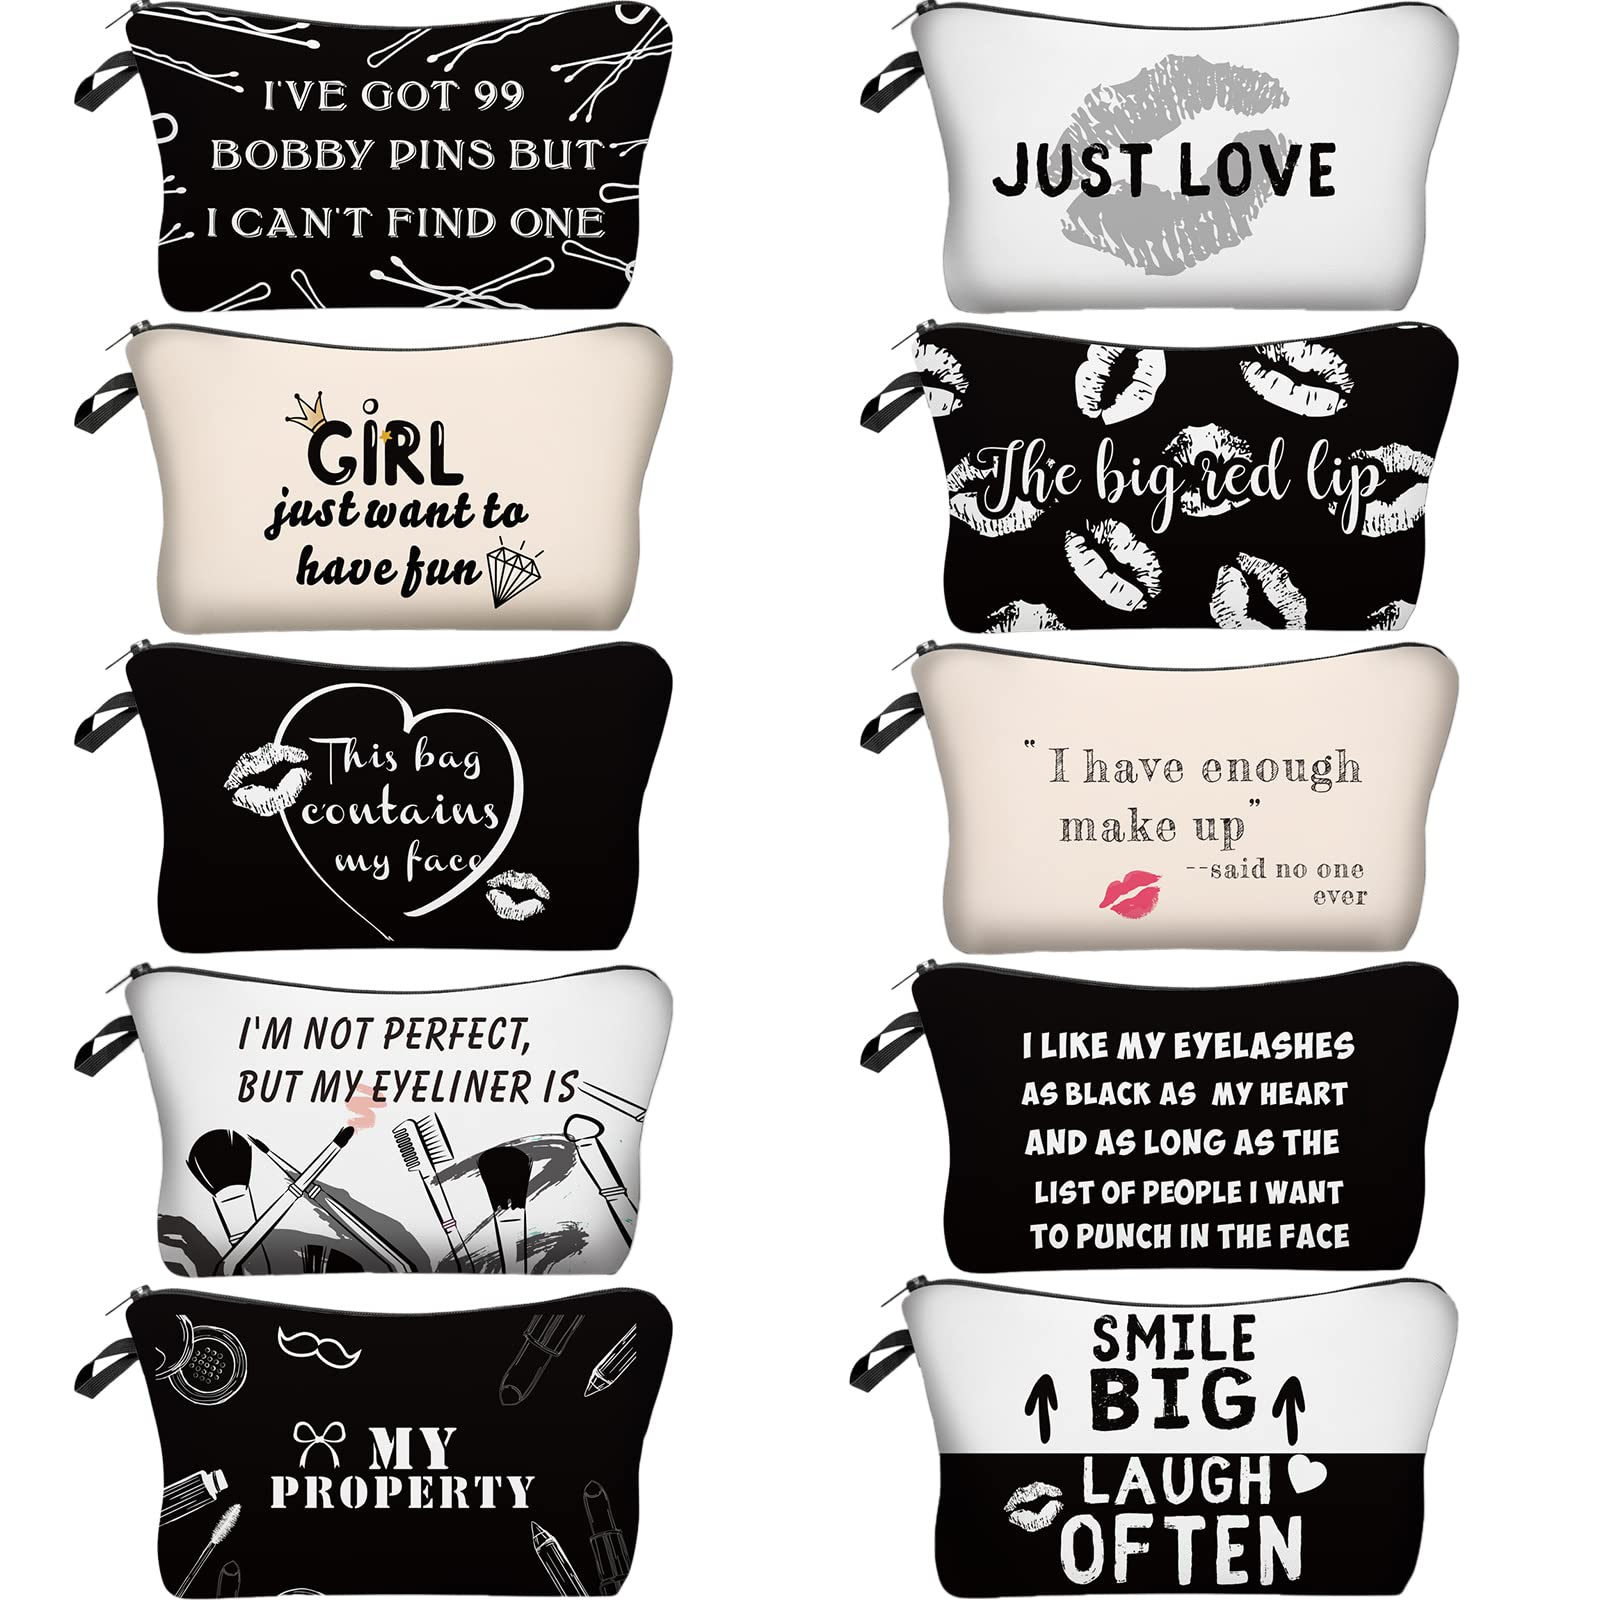 10 Pieces Letters Makeup Bags Cosmetic Pouch Travel Zipper Cosmetic Organizer Toiletry Bag Printing Pencil Bag for Women Girls Supplies Christmas Gift (Black and White Style)